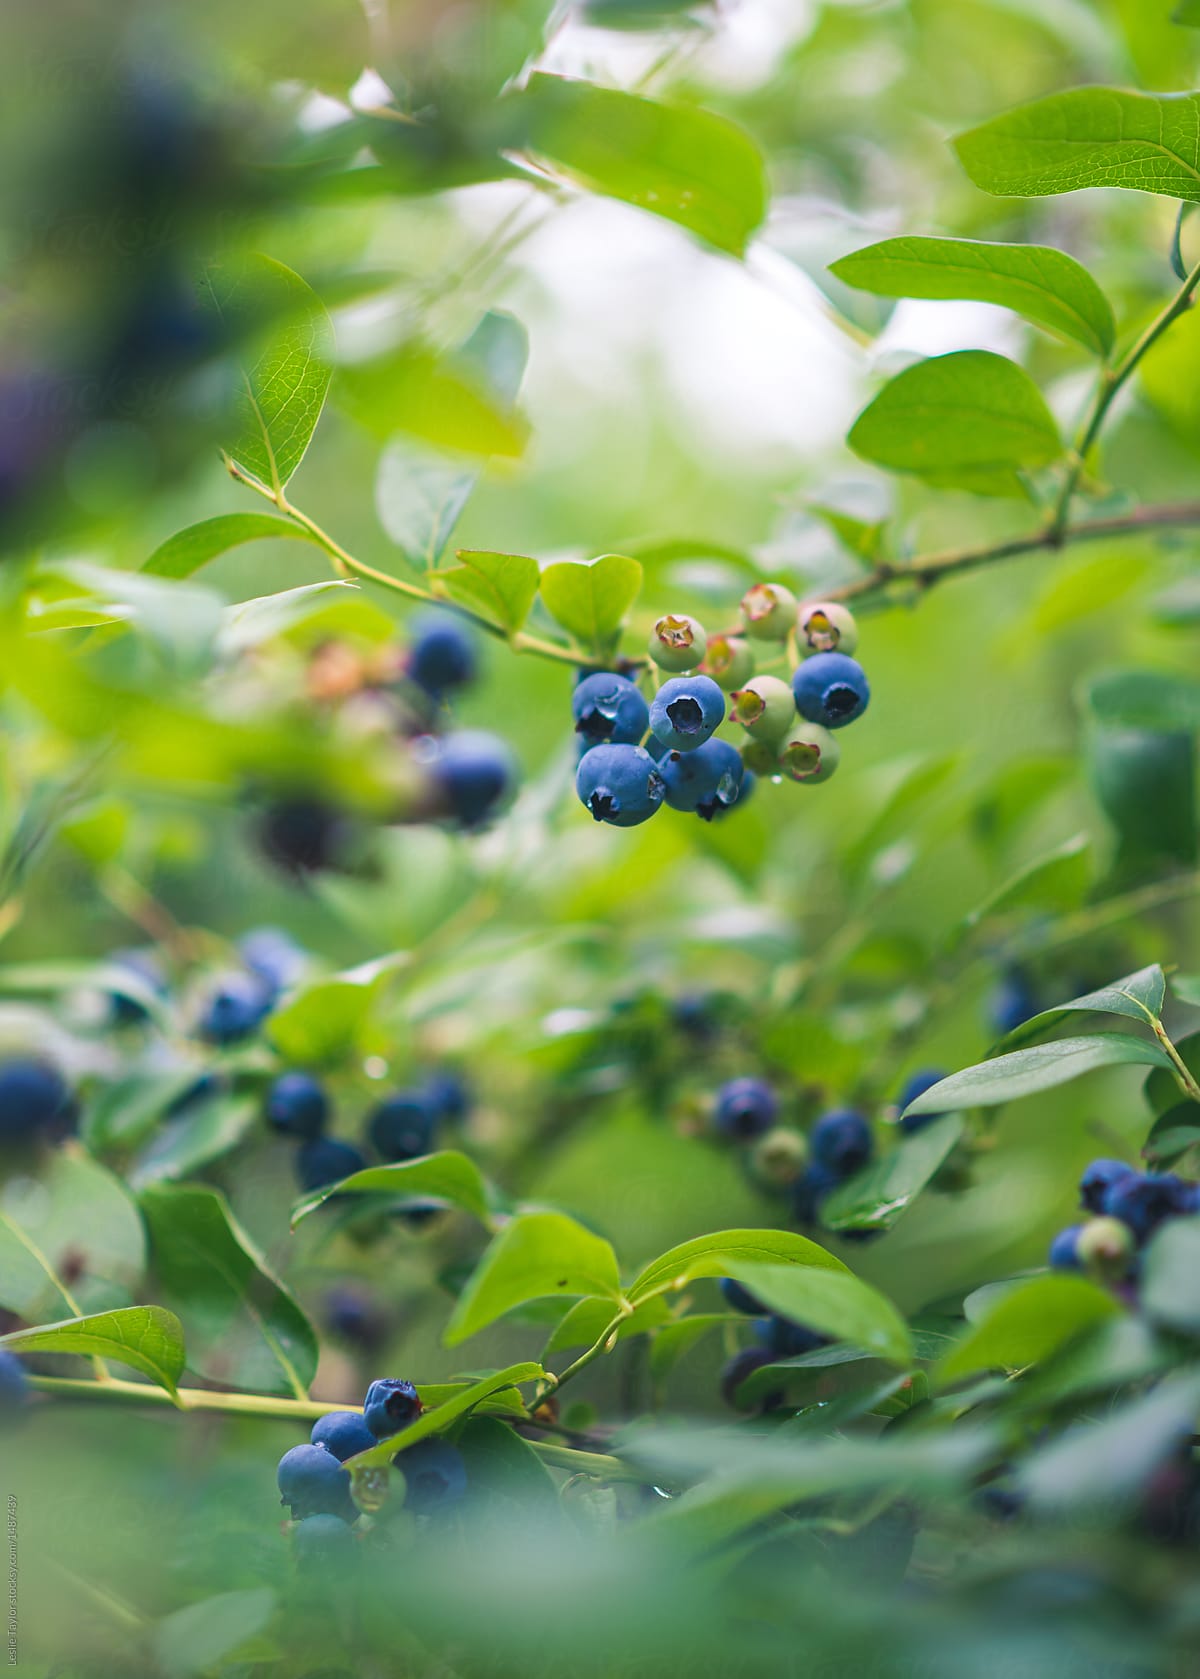 A cluster of blueberries on a blueberry bush